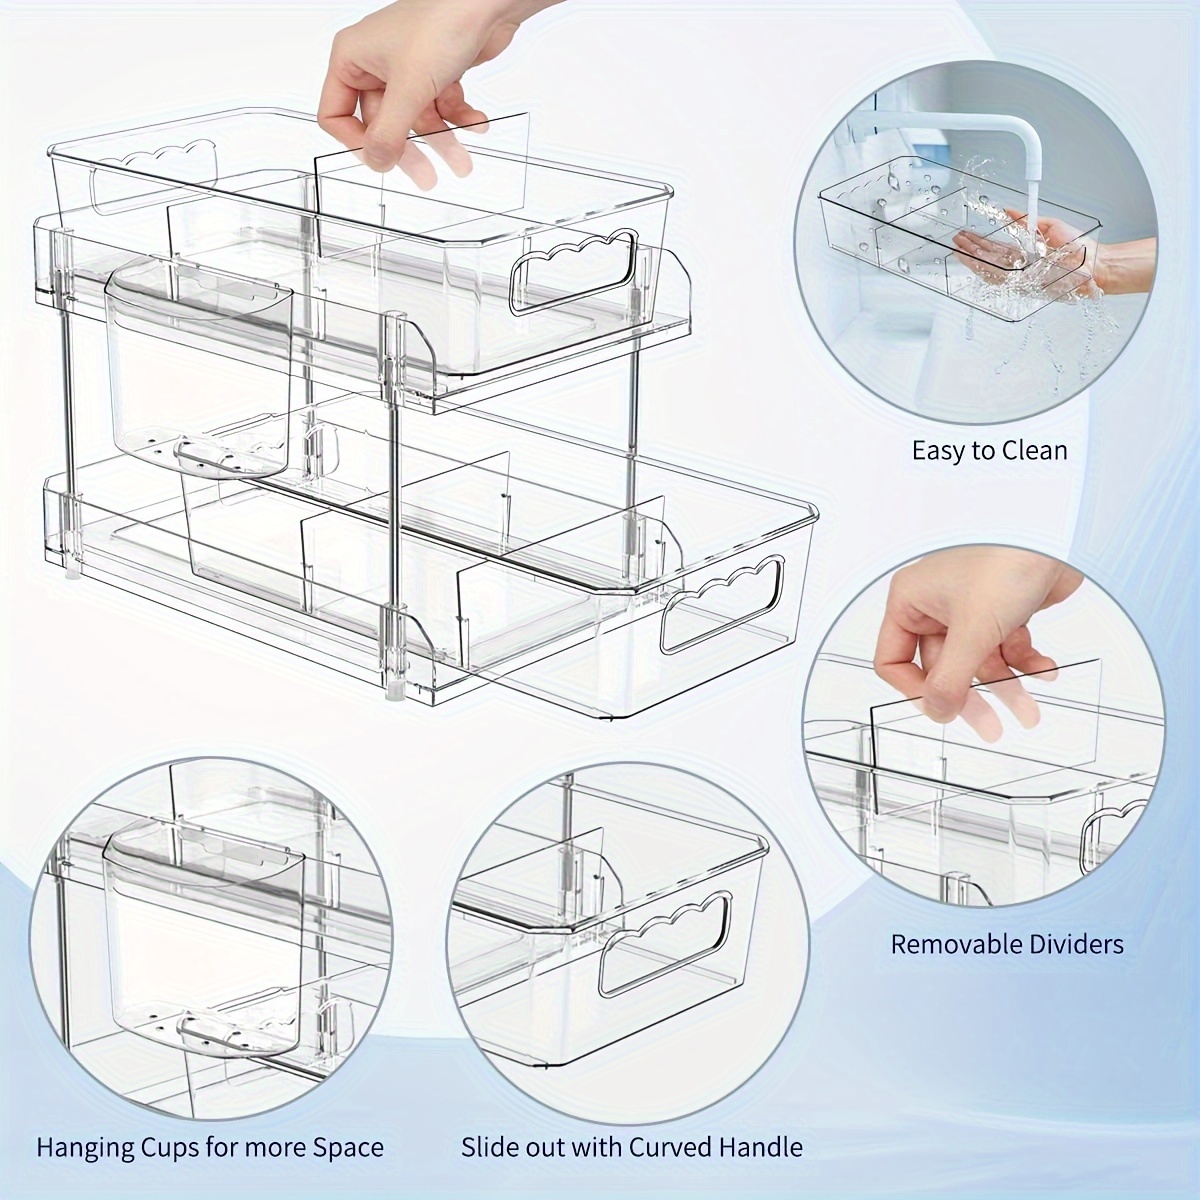 2 Tier Slide Out Under Sink Organizers and Storage with Removable Dividers  - Undersink Cabinet Drawers for Bathroom, Kithcen Cleaning and Organization